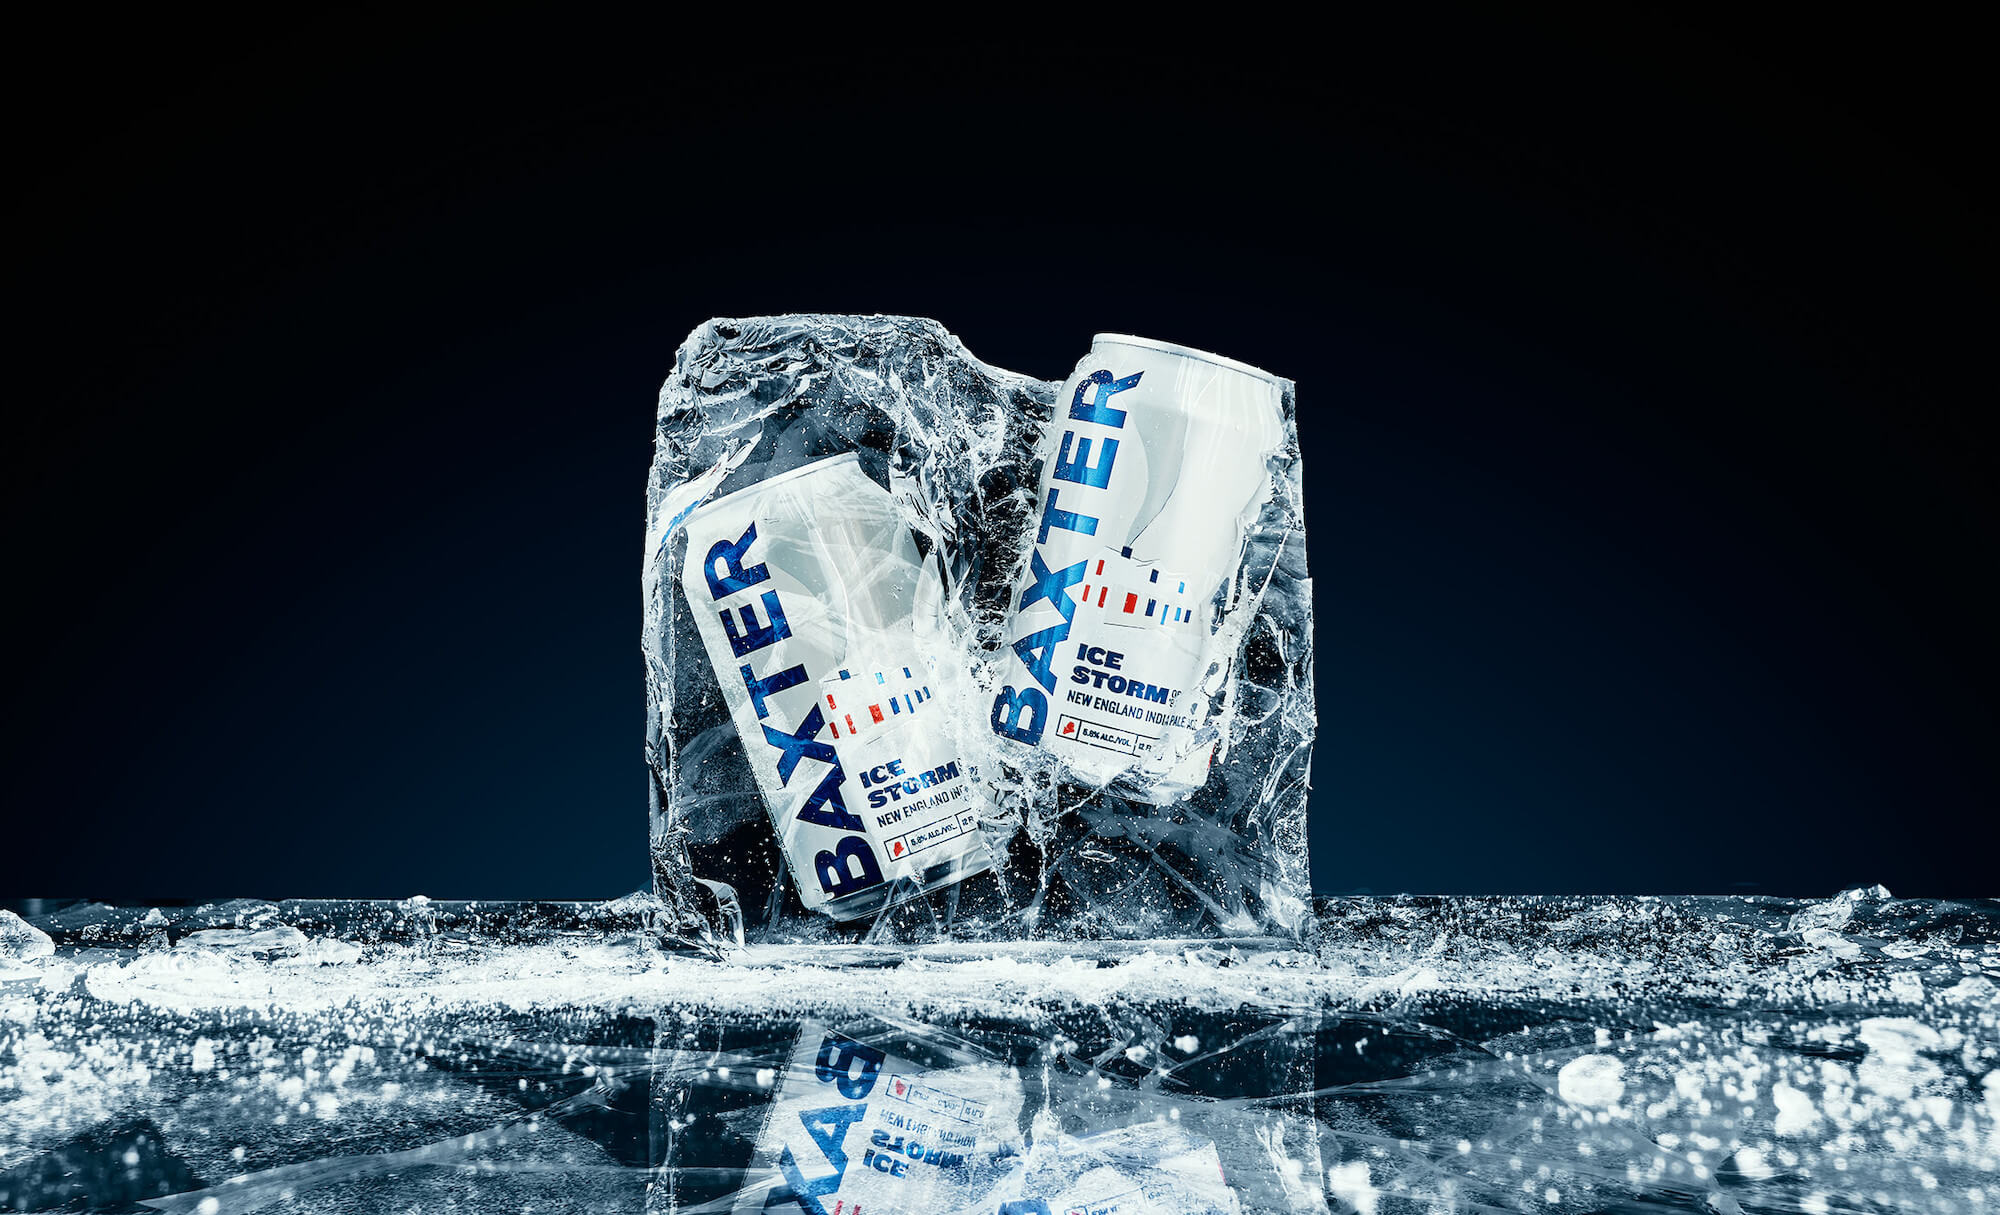 image of beer can ice storm of 98 in a block of ice